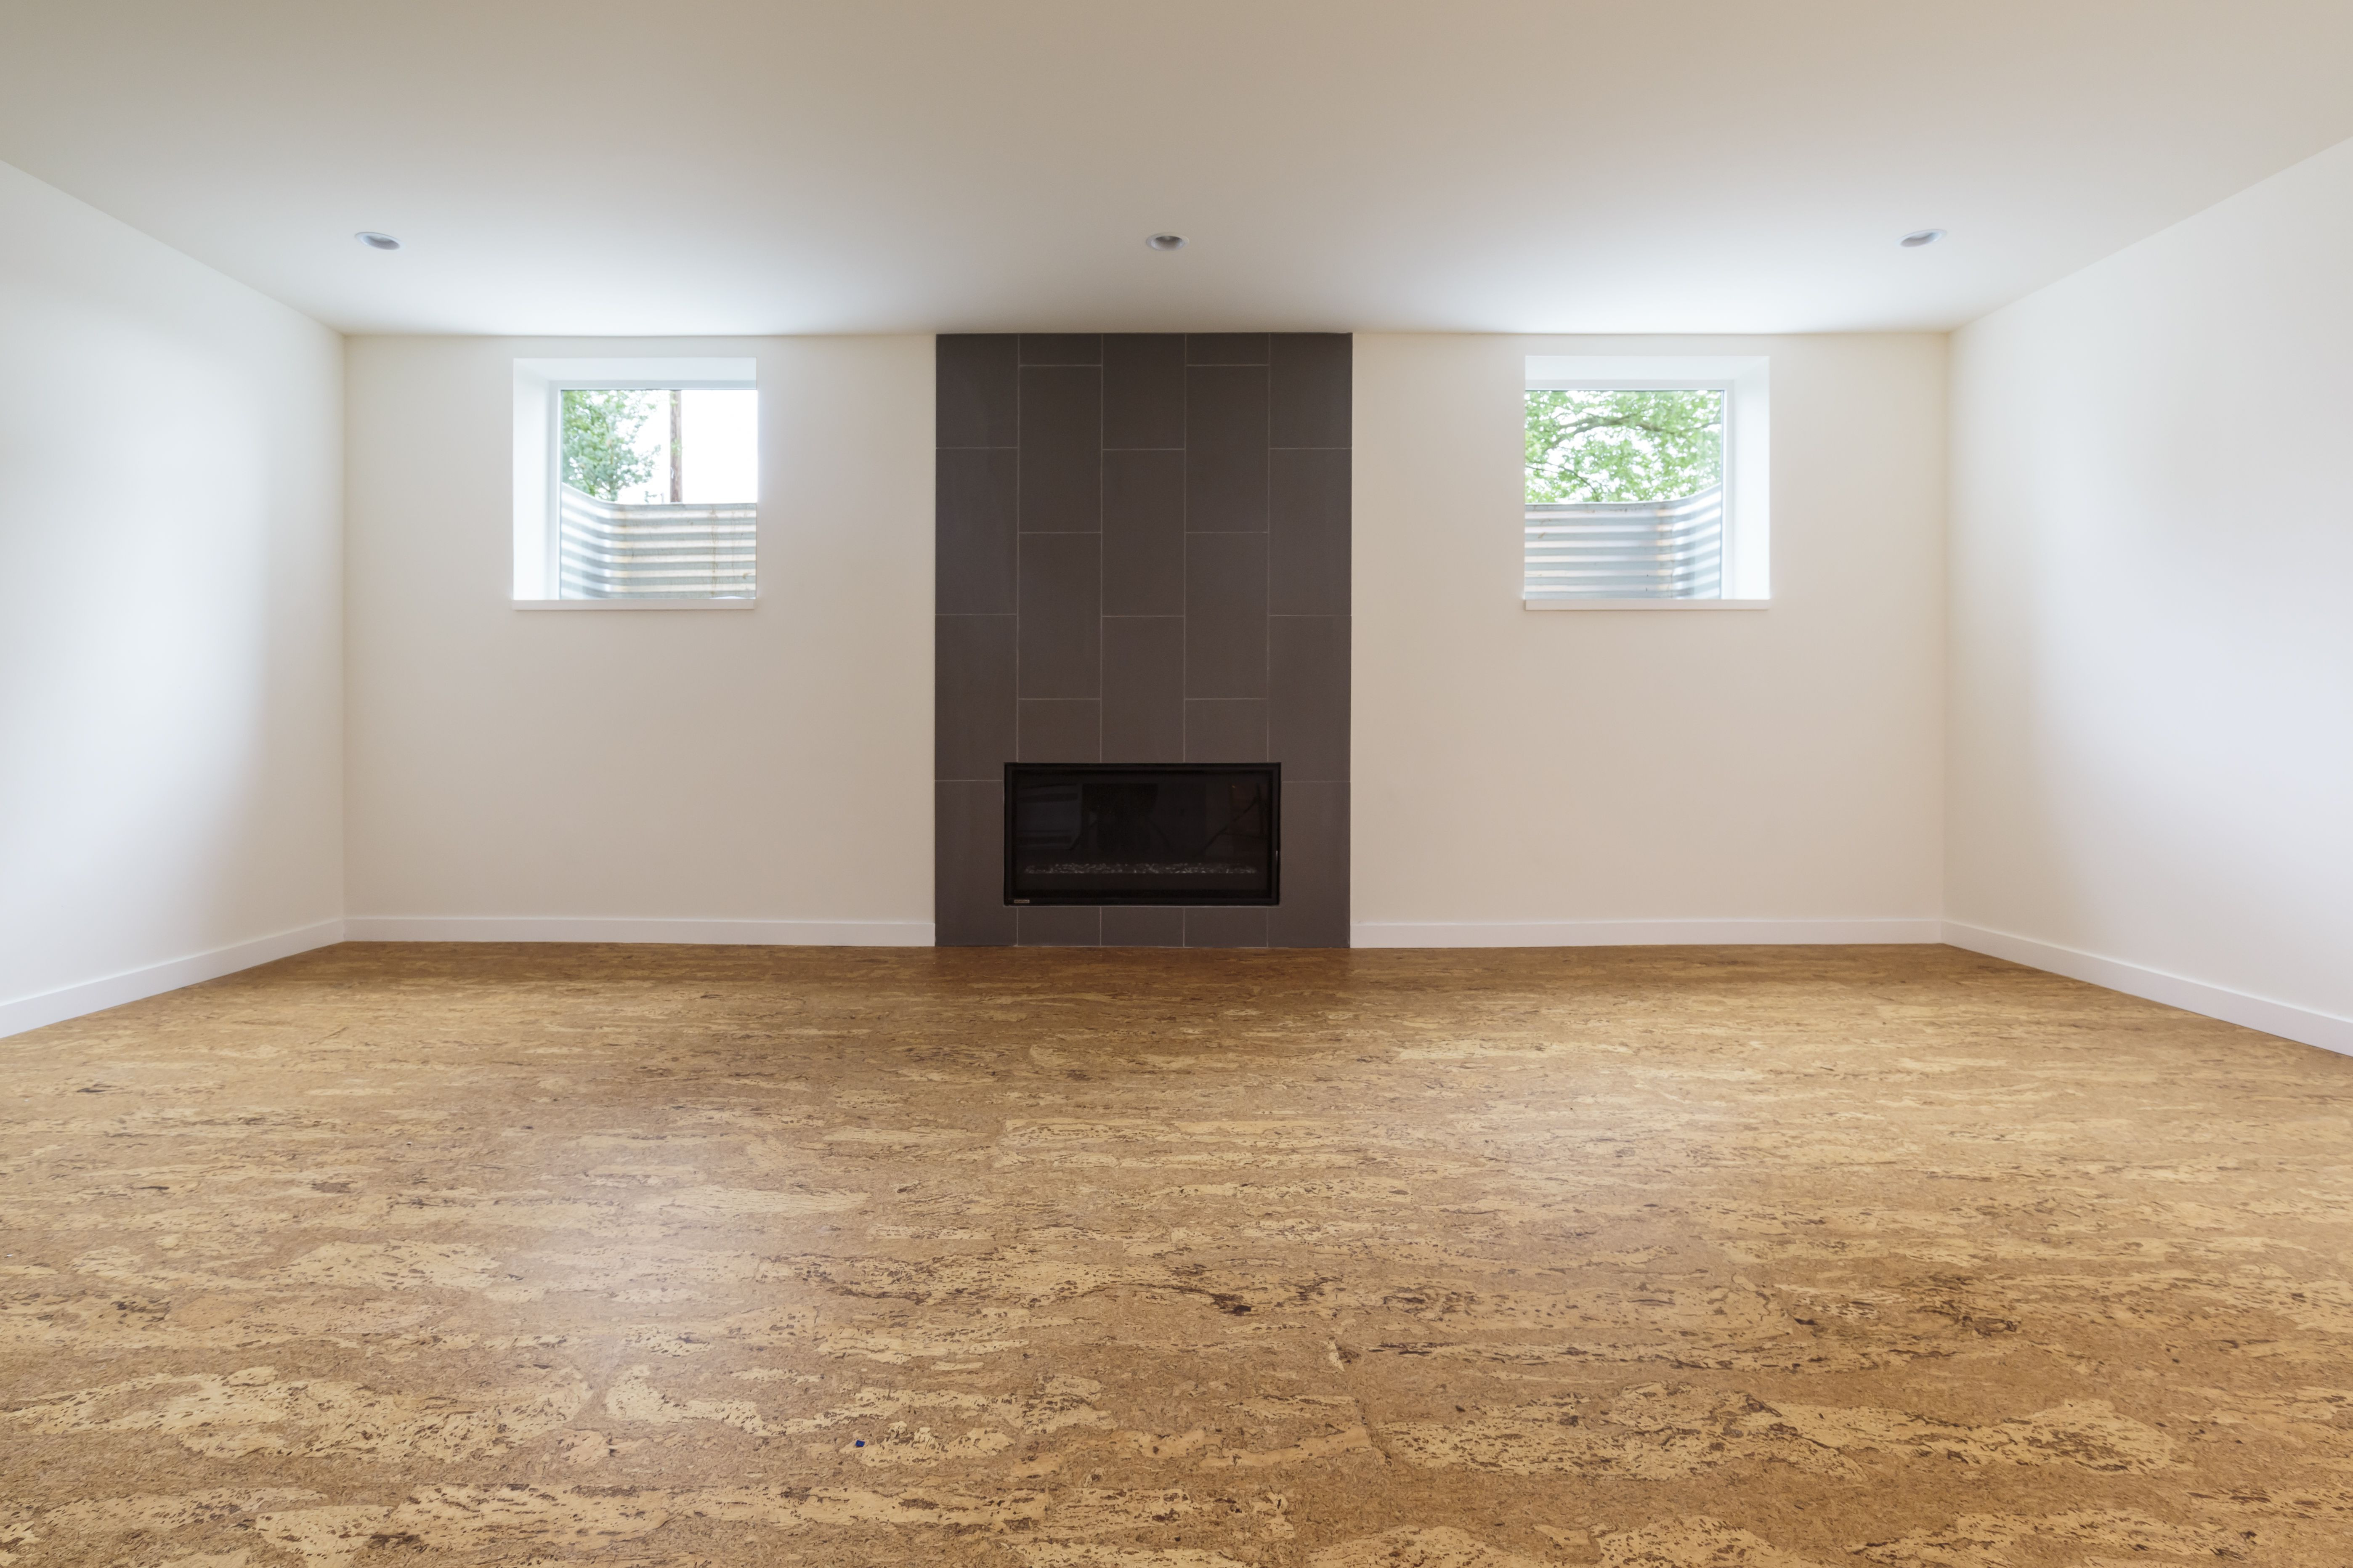 23 Lovely How Much is Hardwood Flooring Per Square Foot 2024 free download how much is hardwood flooring per square foot of cork flooring pros cons and cost in cork flooring in unfurnished new home 647206431 57e7c0c95f9b586c3504ca07